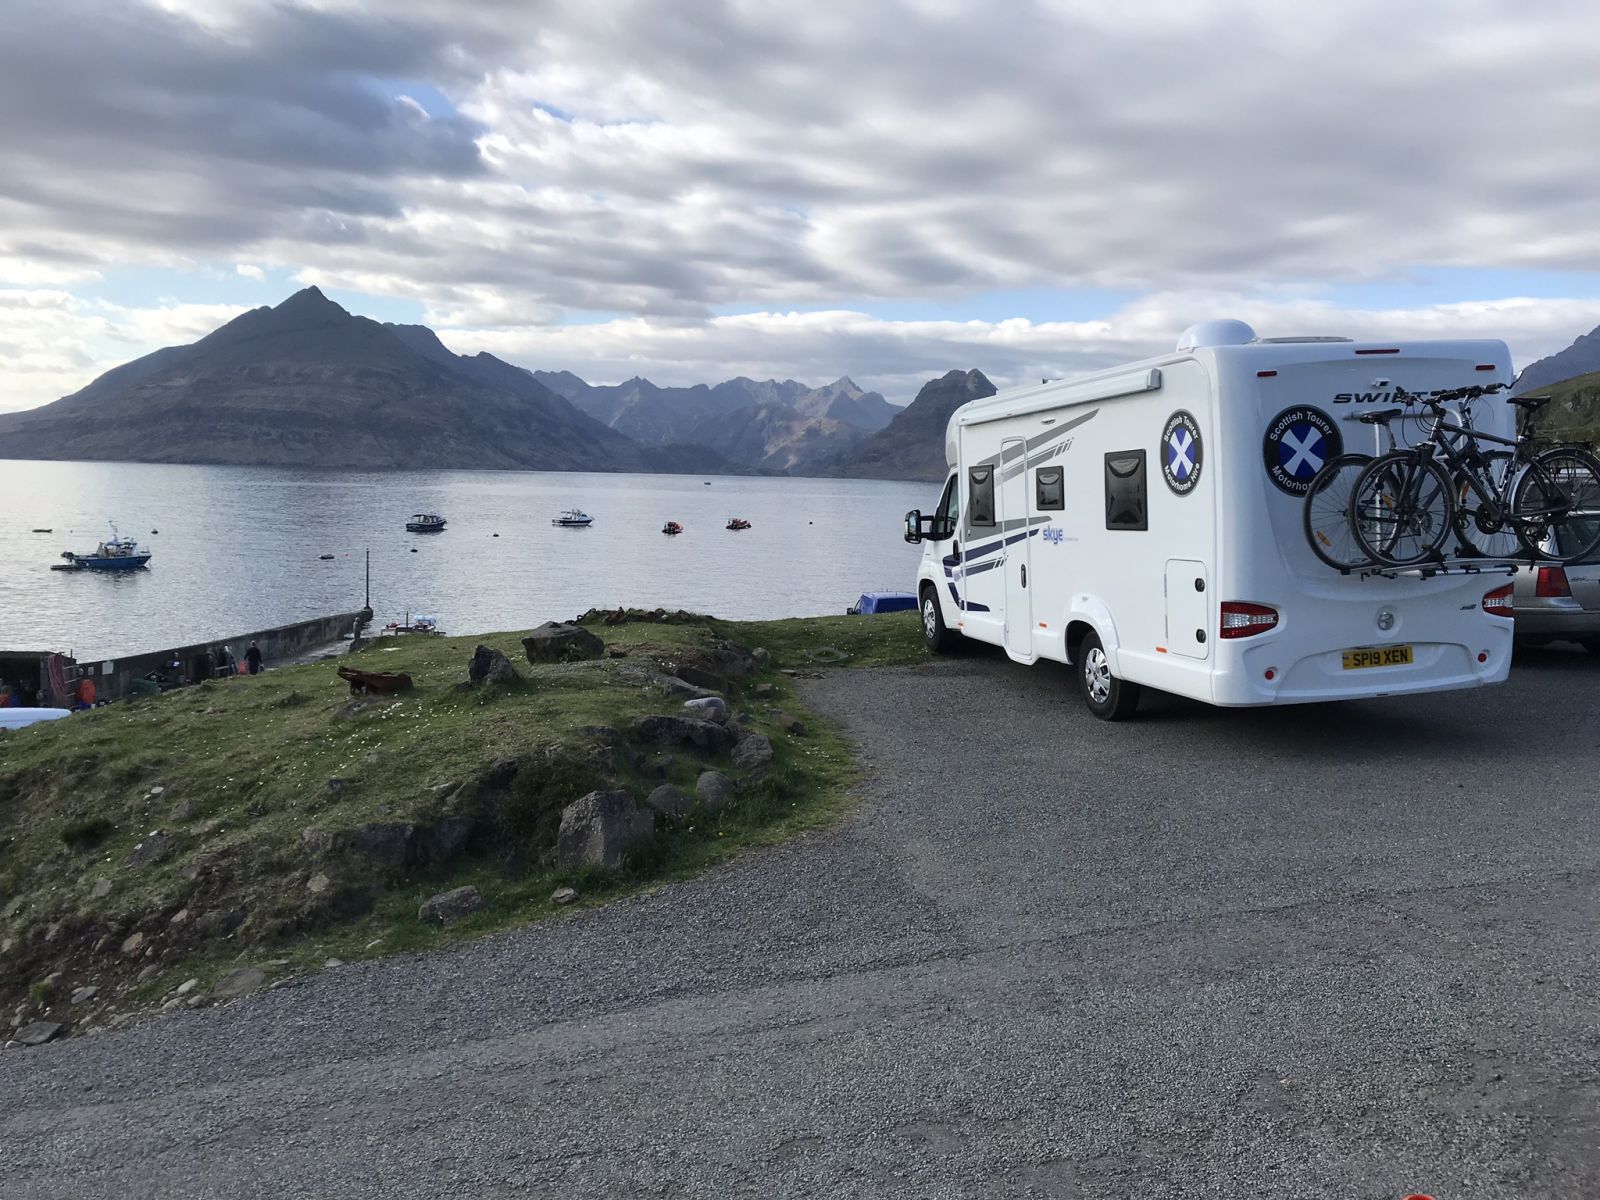 Campervan parked by the loch